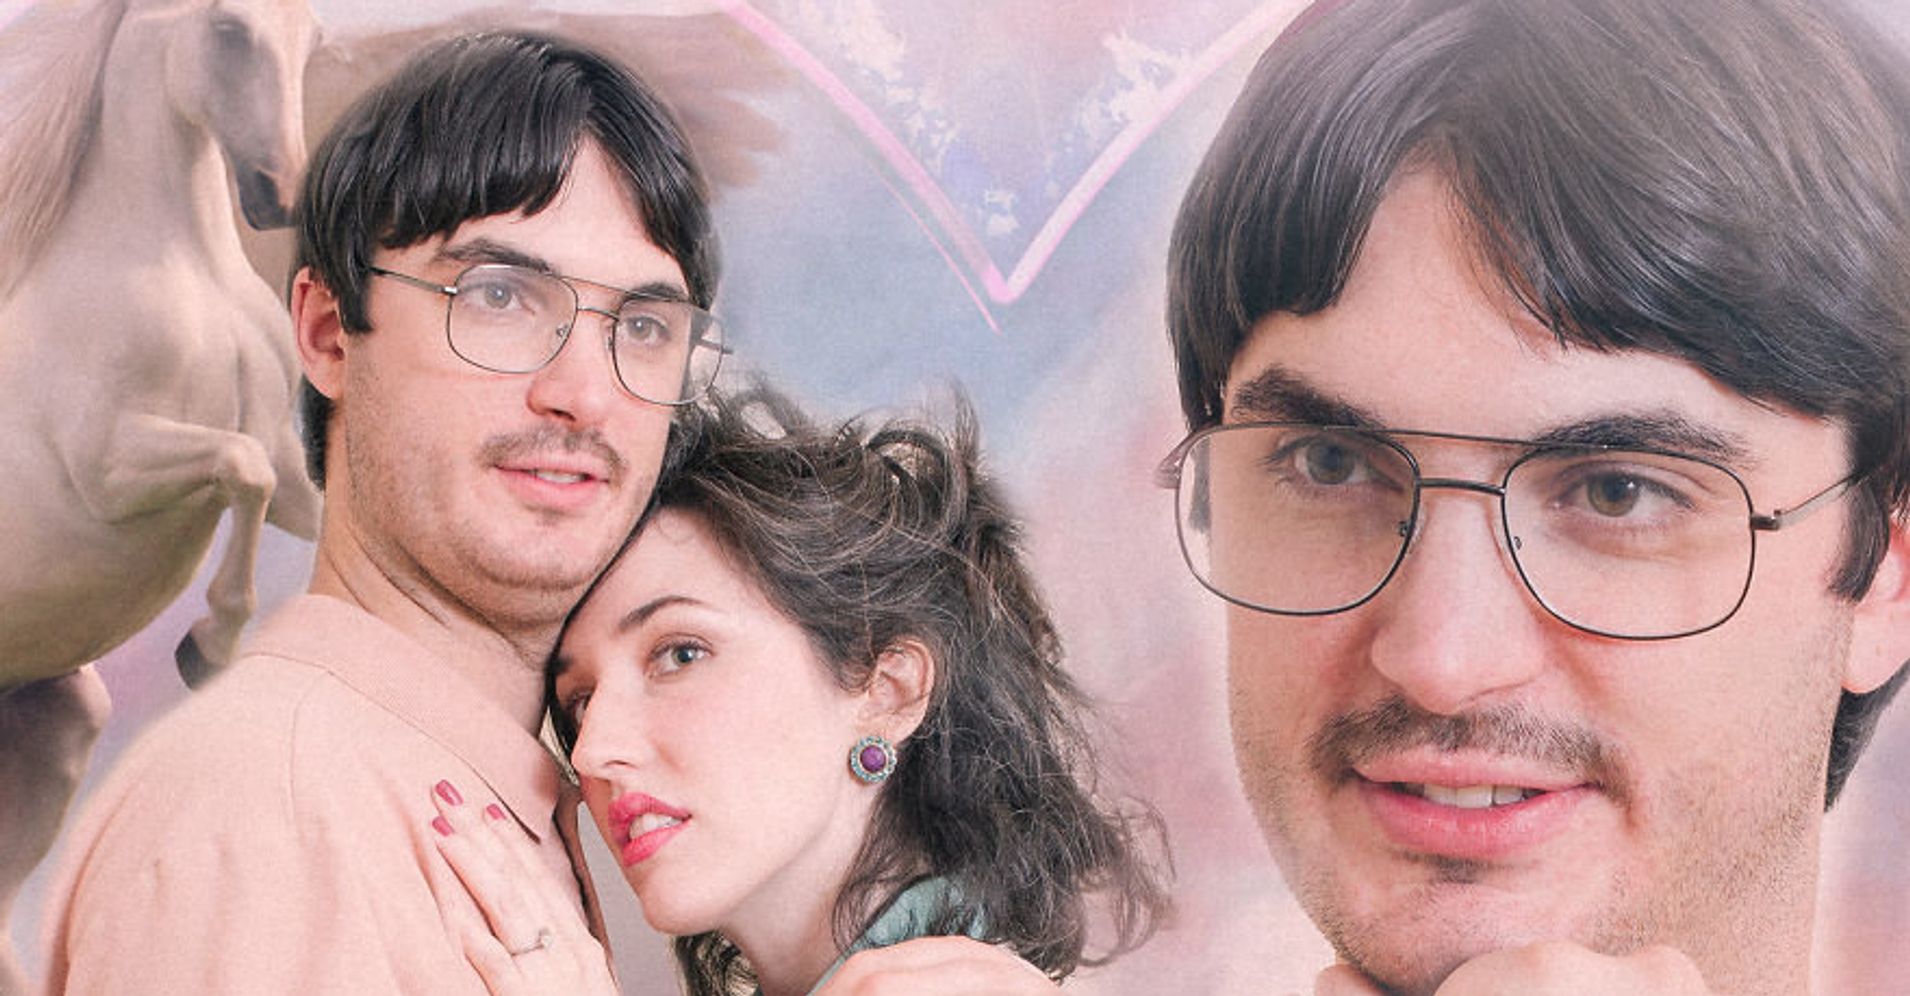 This Couple S 80s Themed Engagement Photos Are Pure Cheesy Perfection Huffpost Life